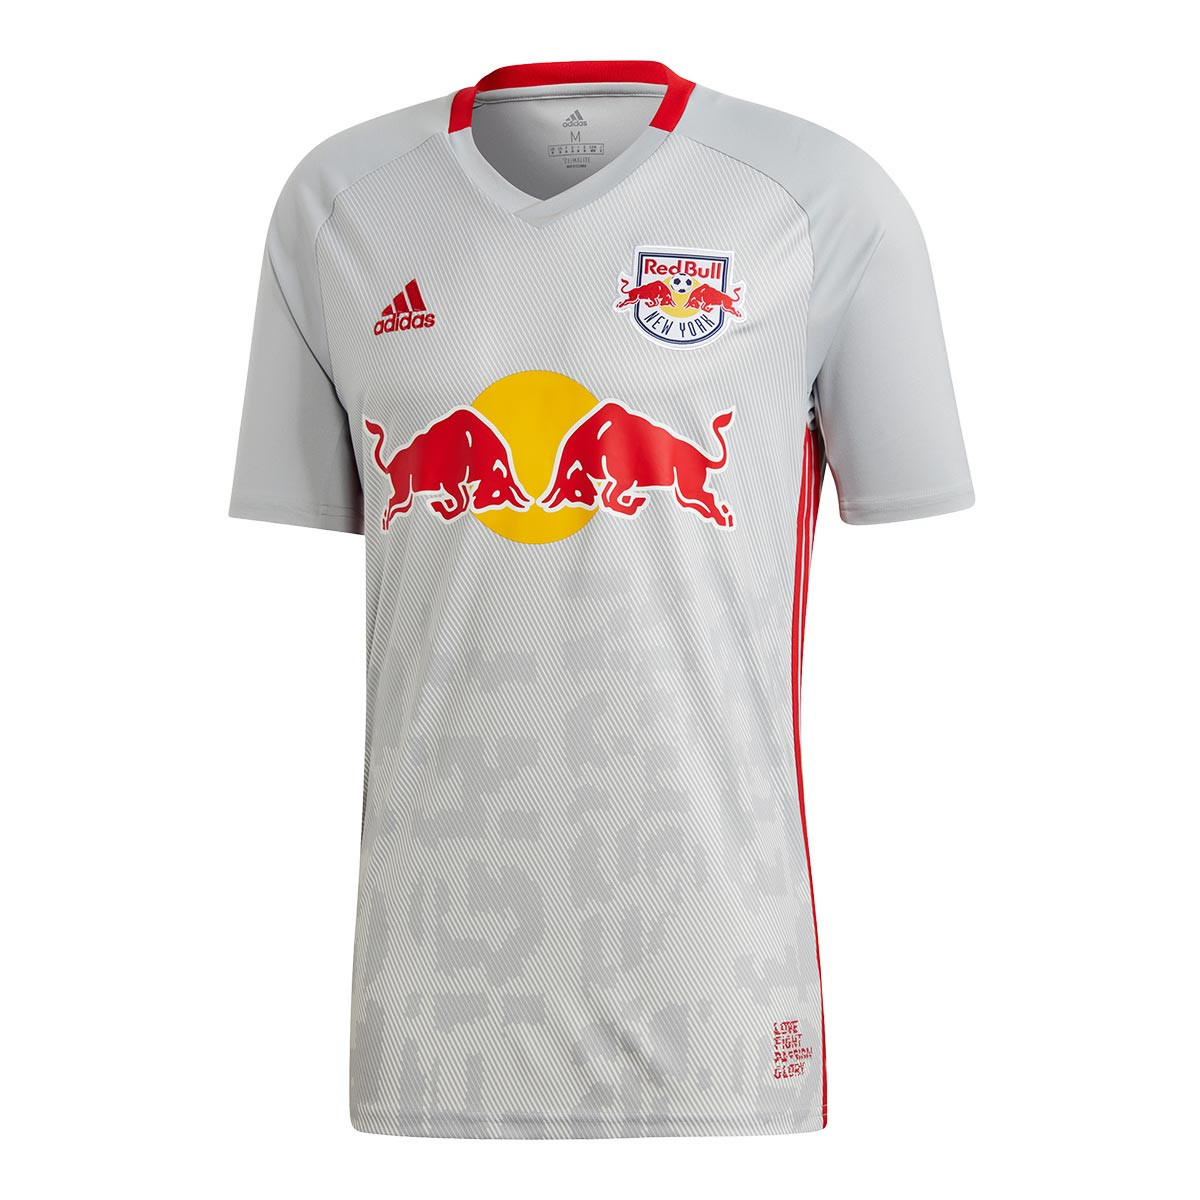 adidas red bull jersey